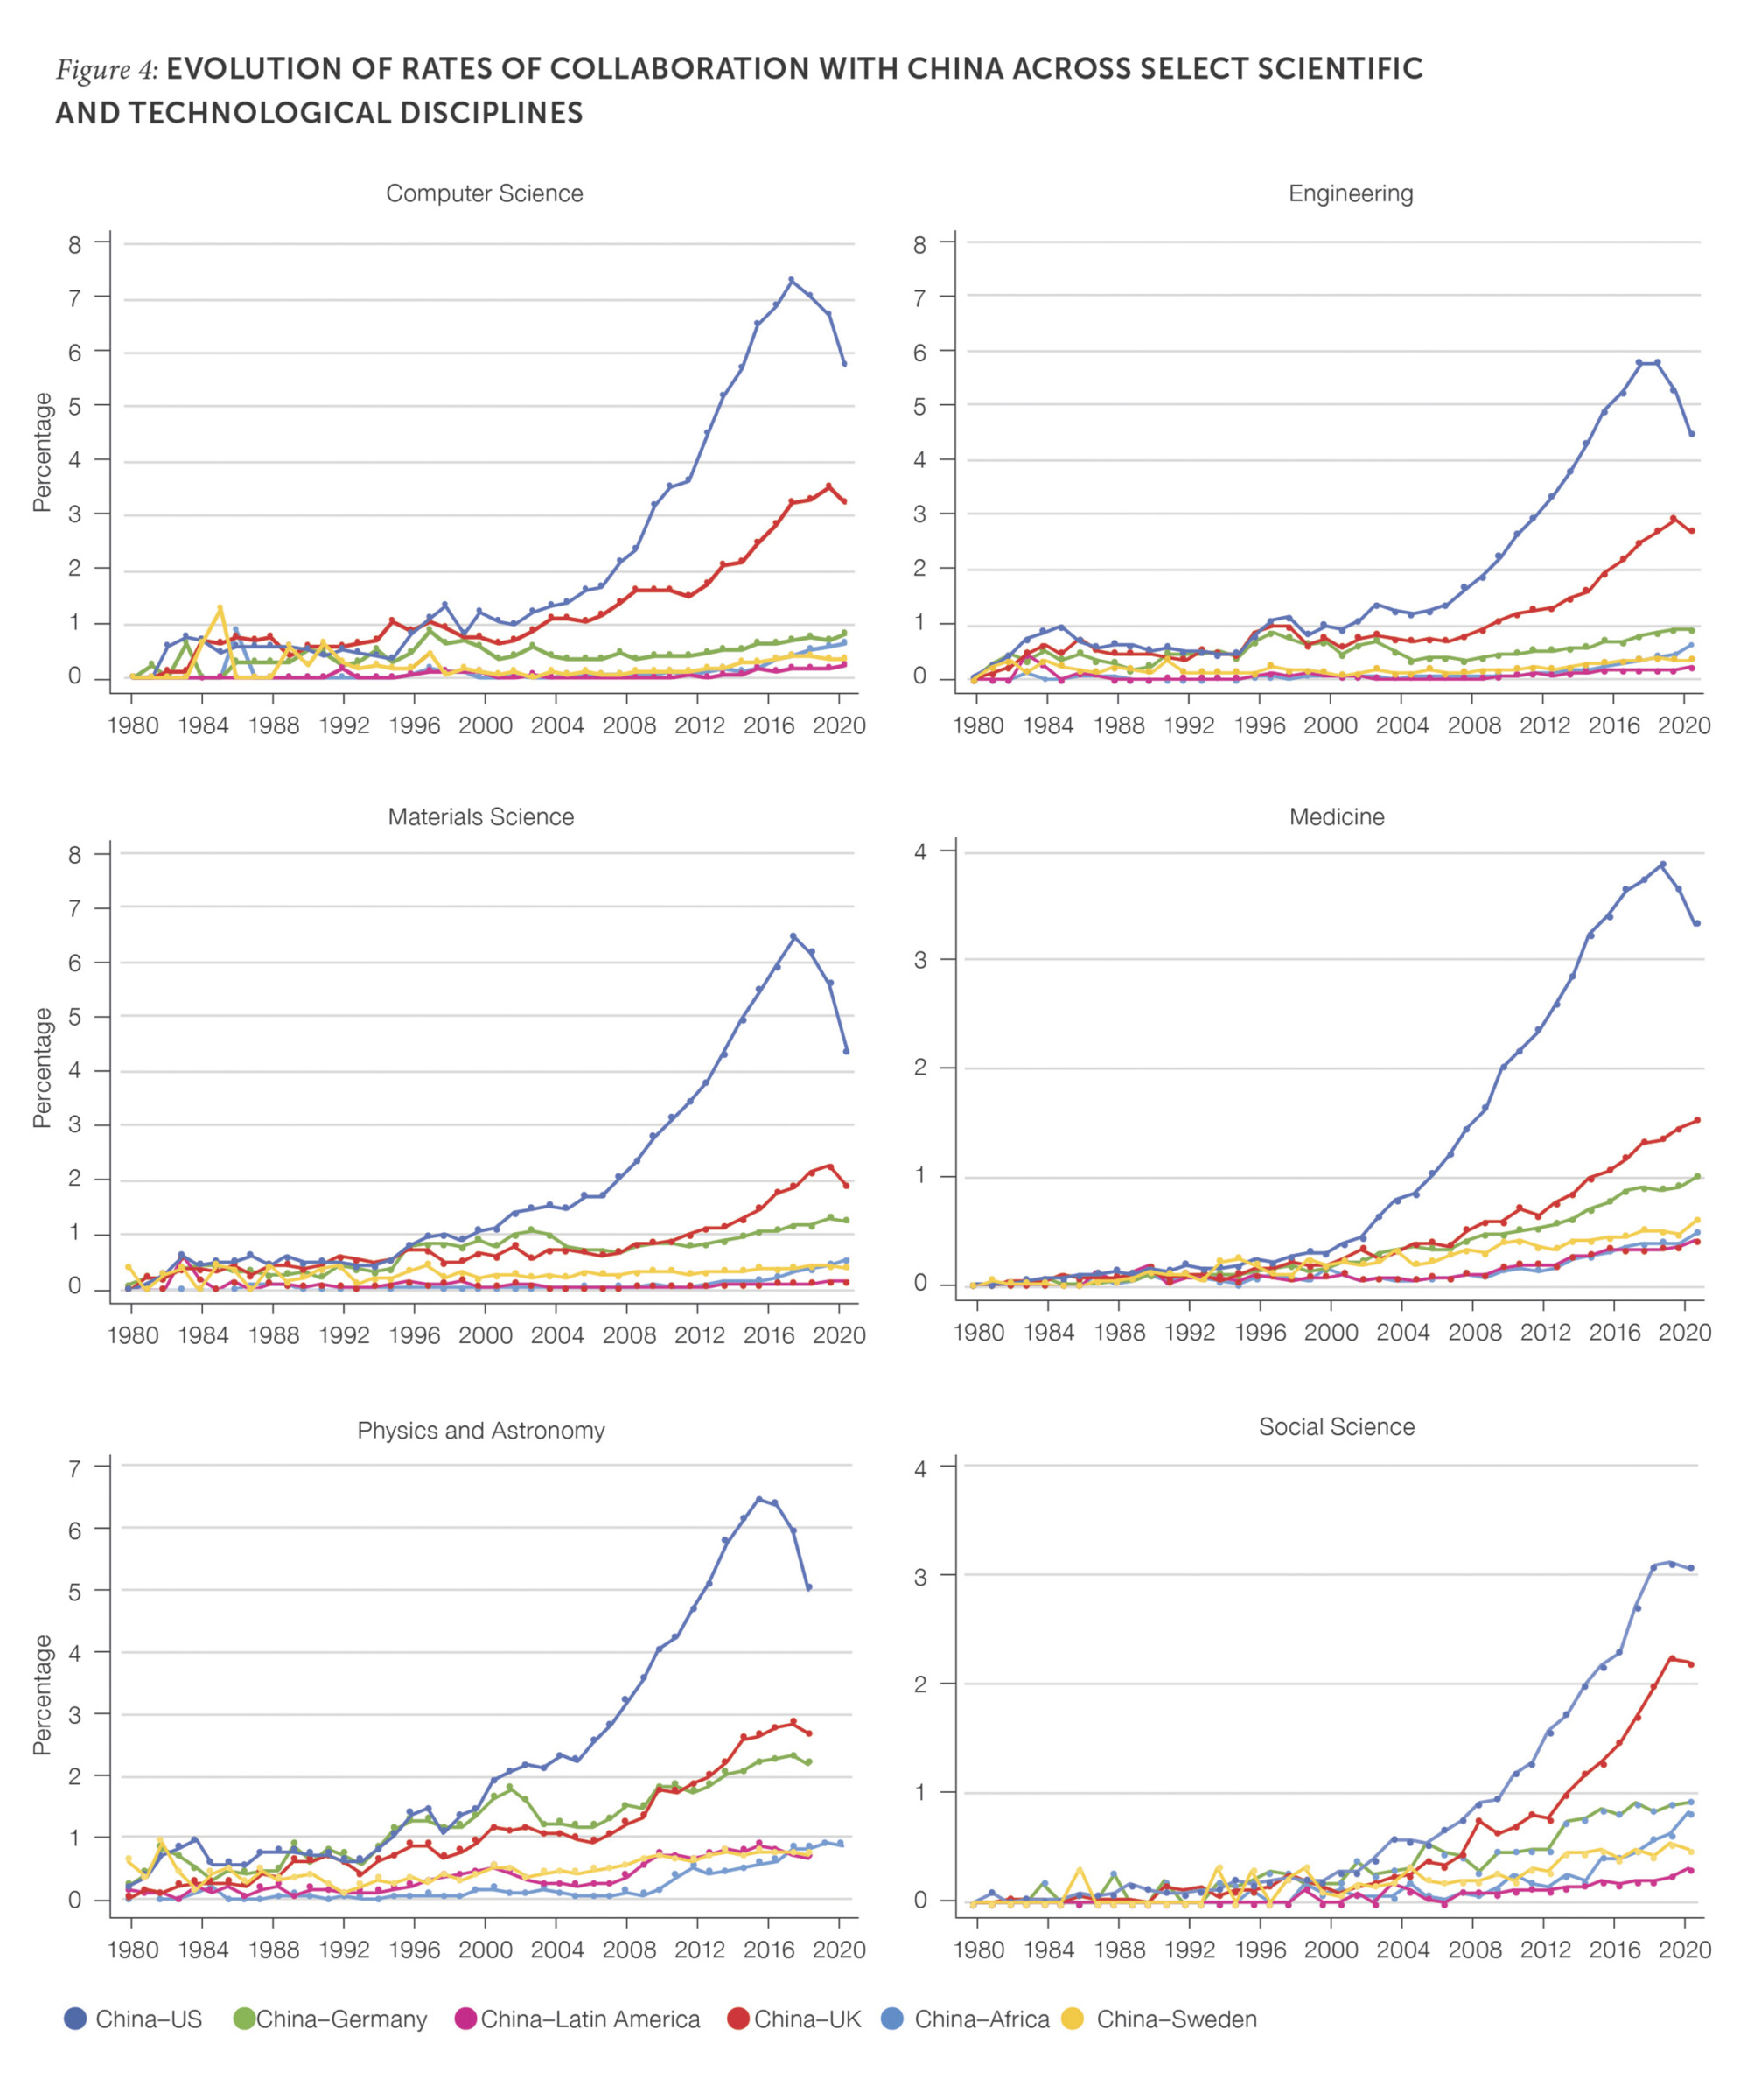 Figure 4. Evolution of Rates of Collaboration with China across Select Scientific and Technological Disciplines